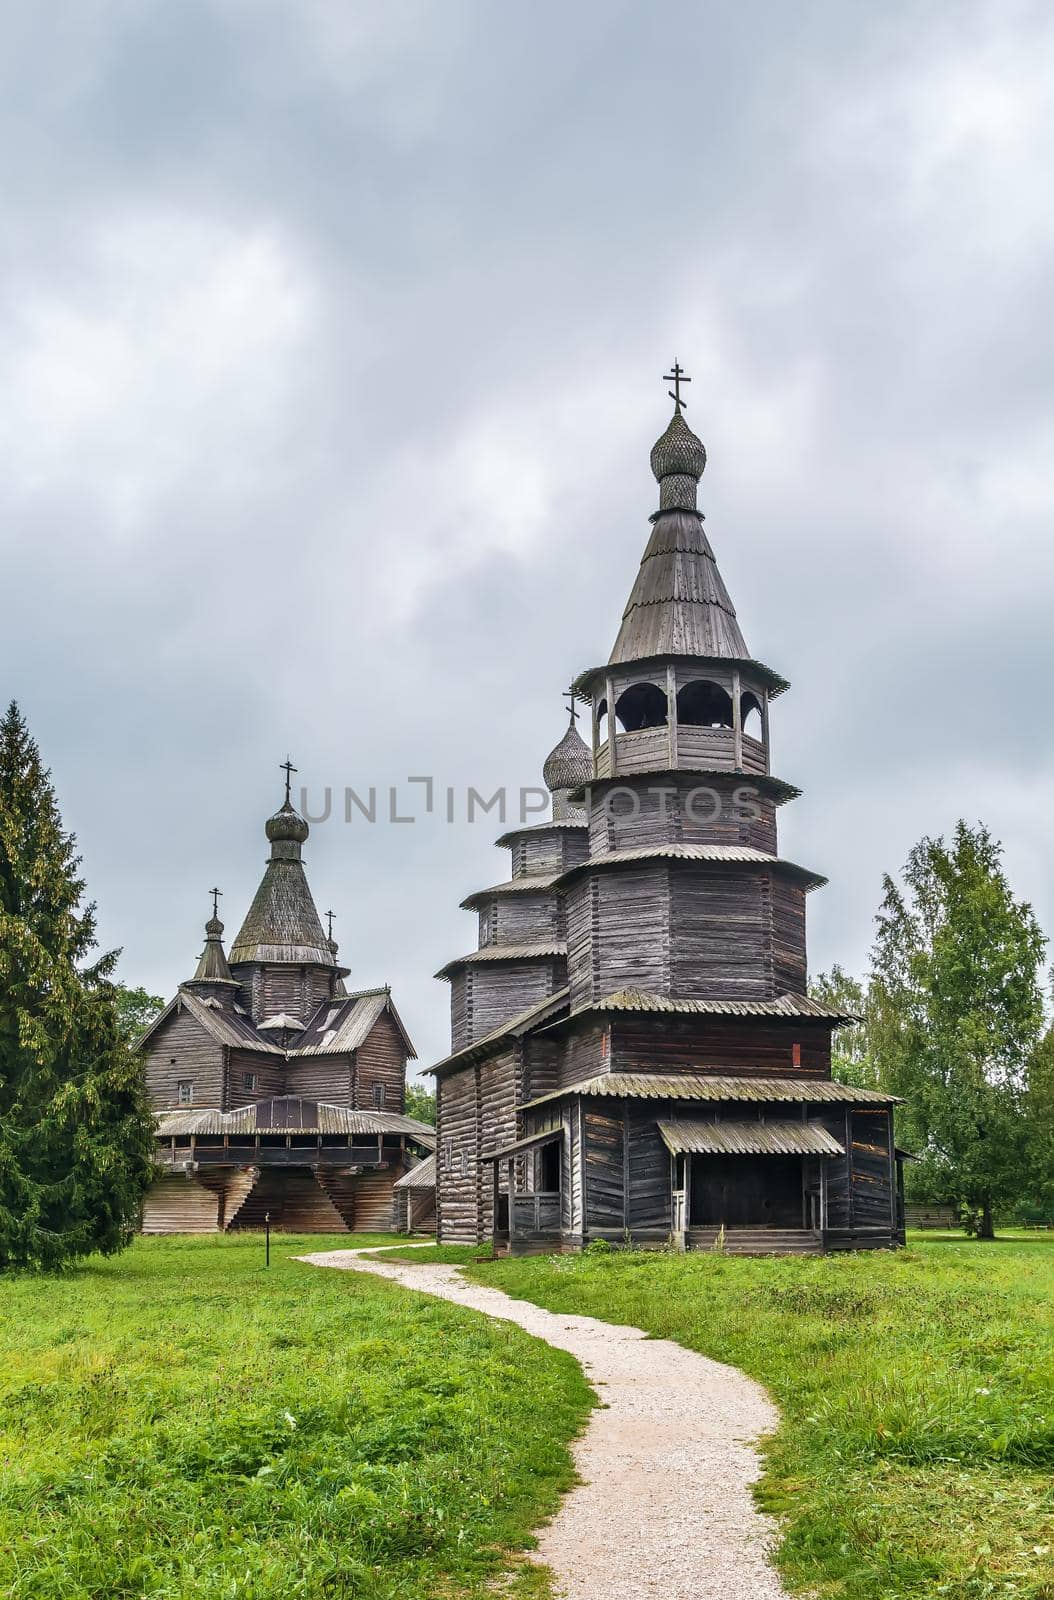 Open-air Museum of Wooden Architecture "Vitoslavlitsy", Russia by borisb17